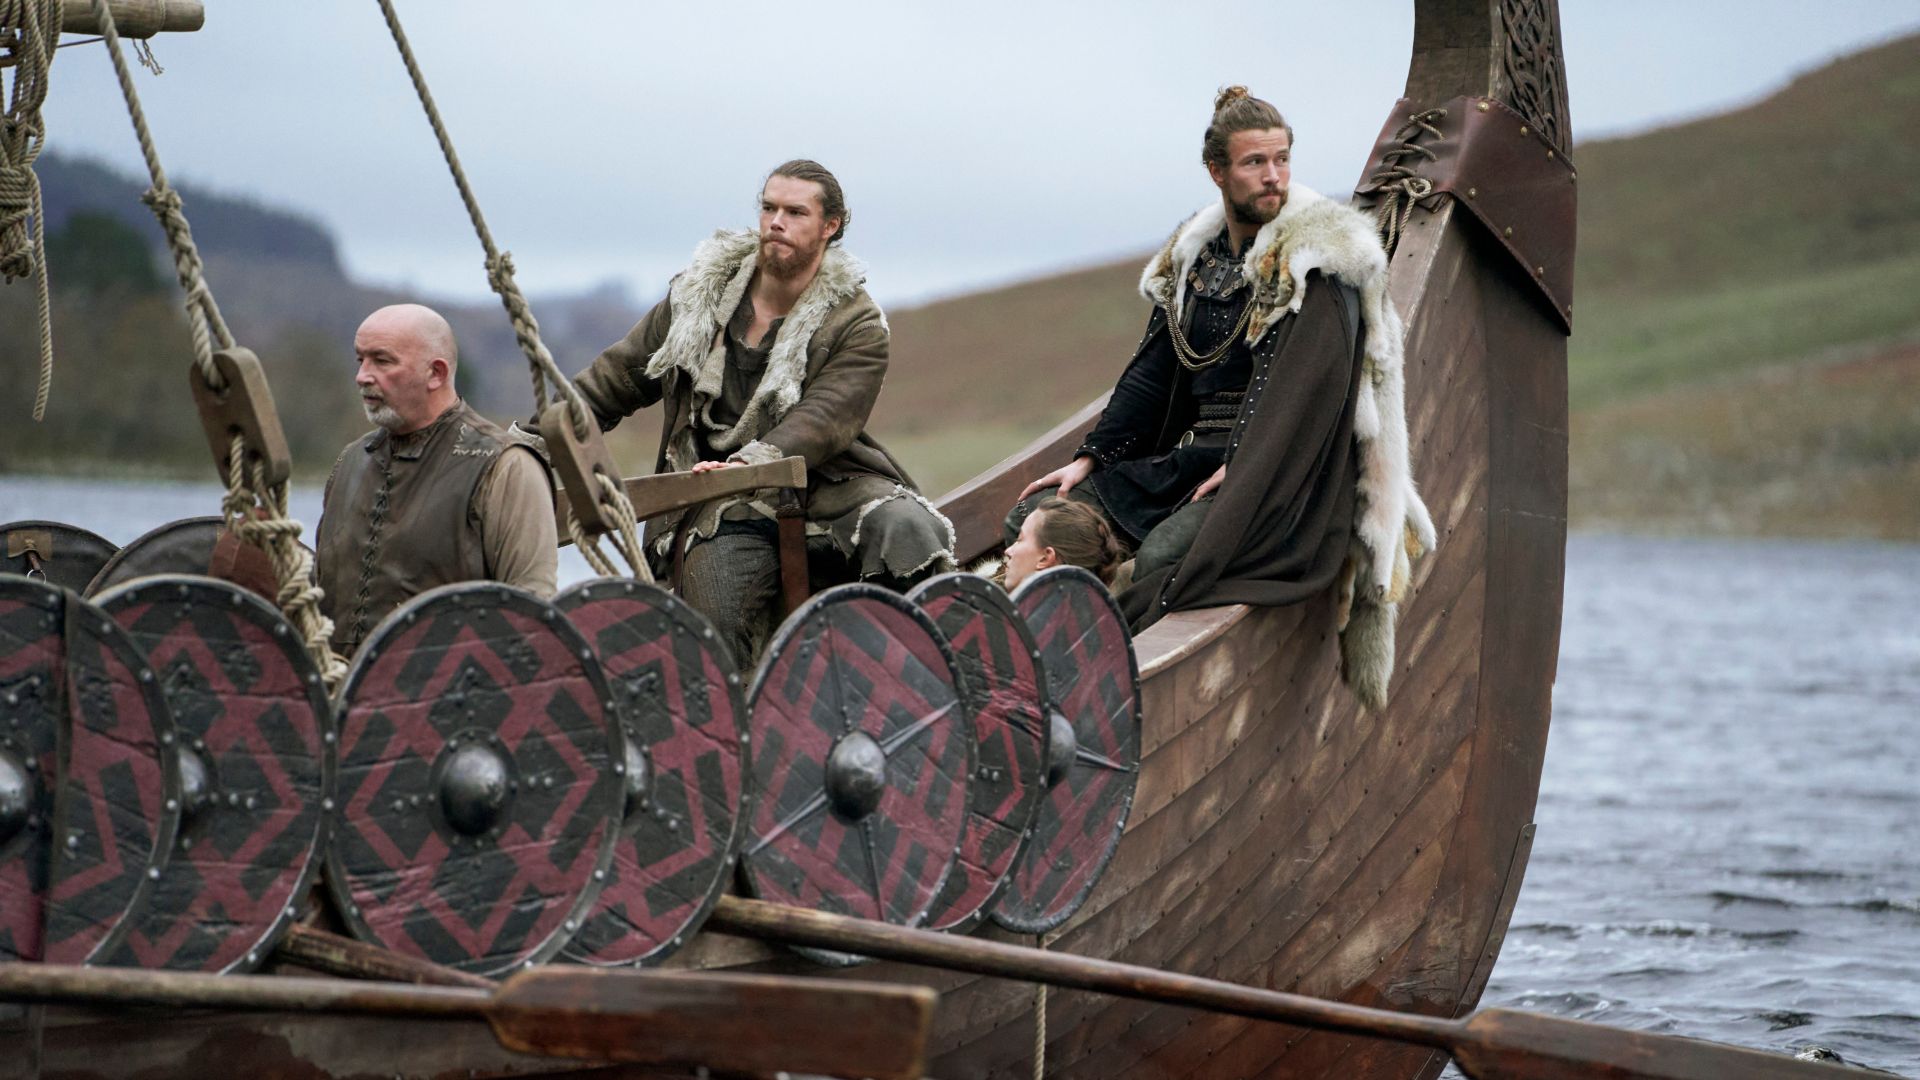 Harald and Leif in Vikings: Valhalla